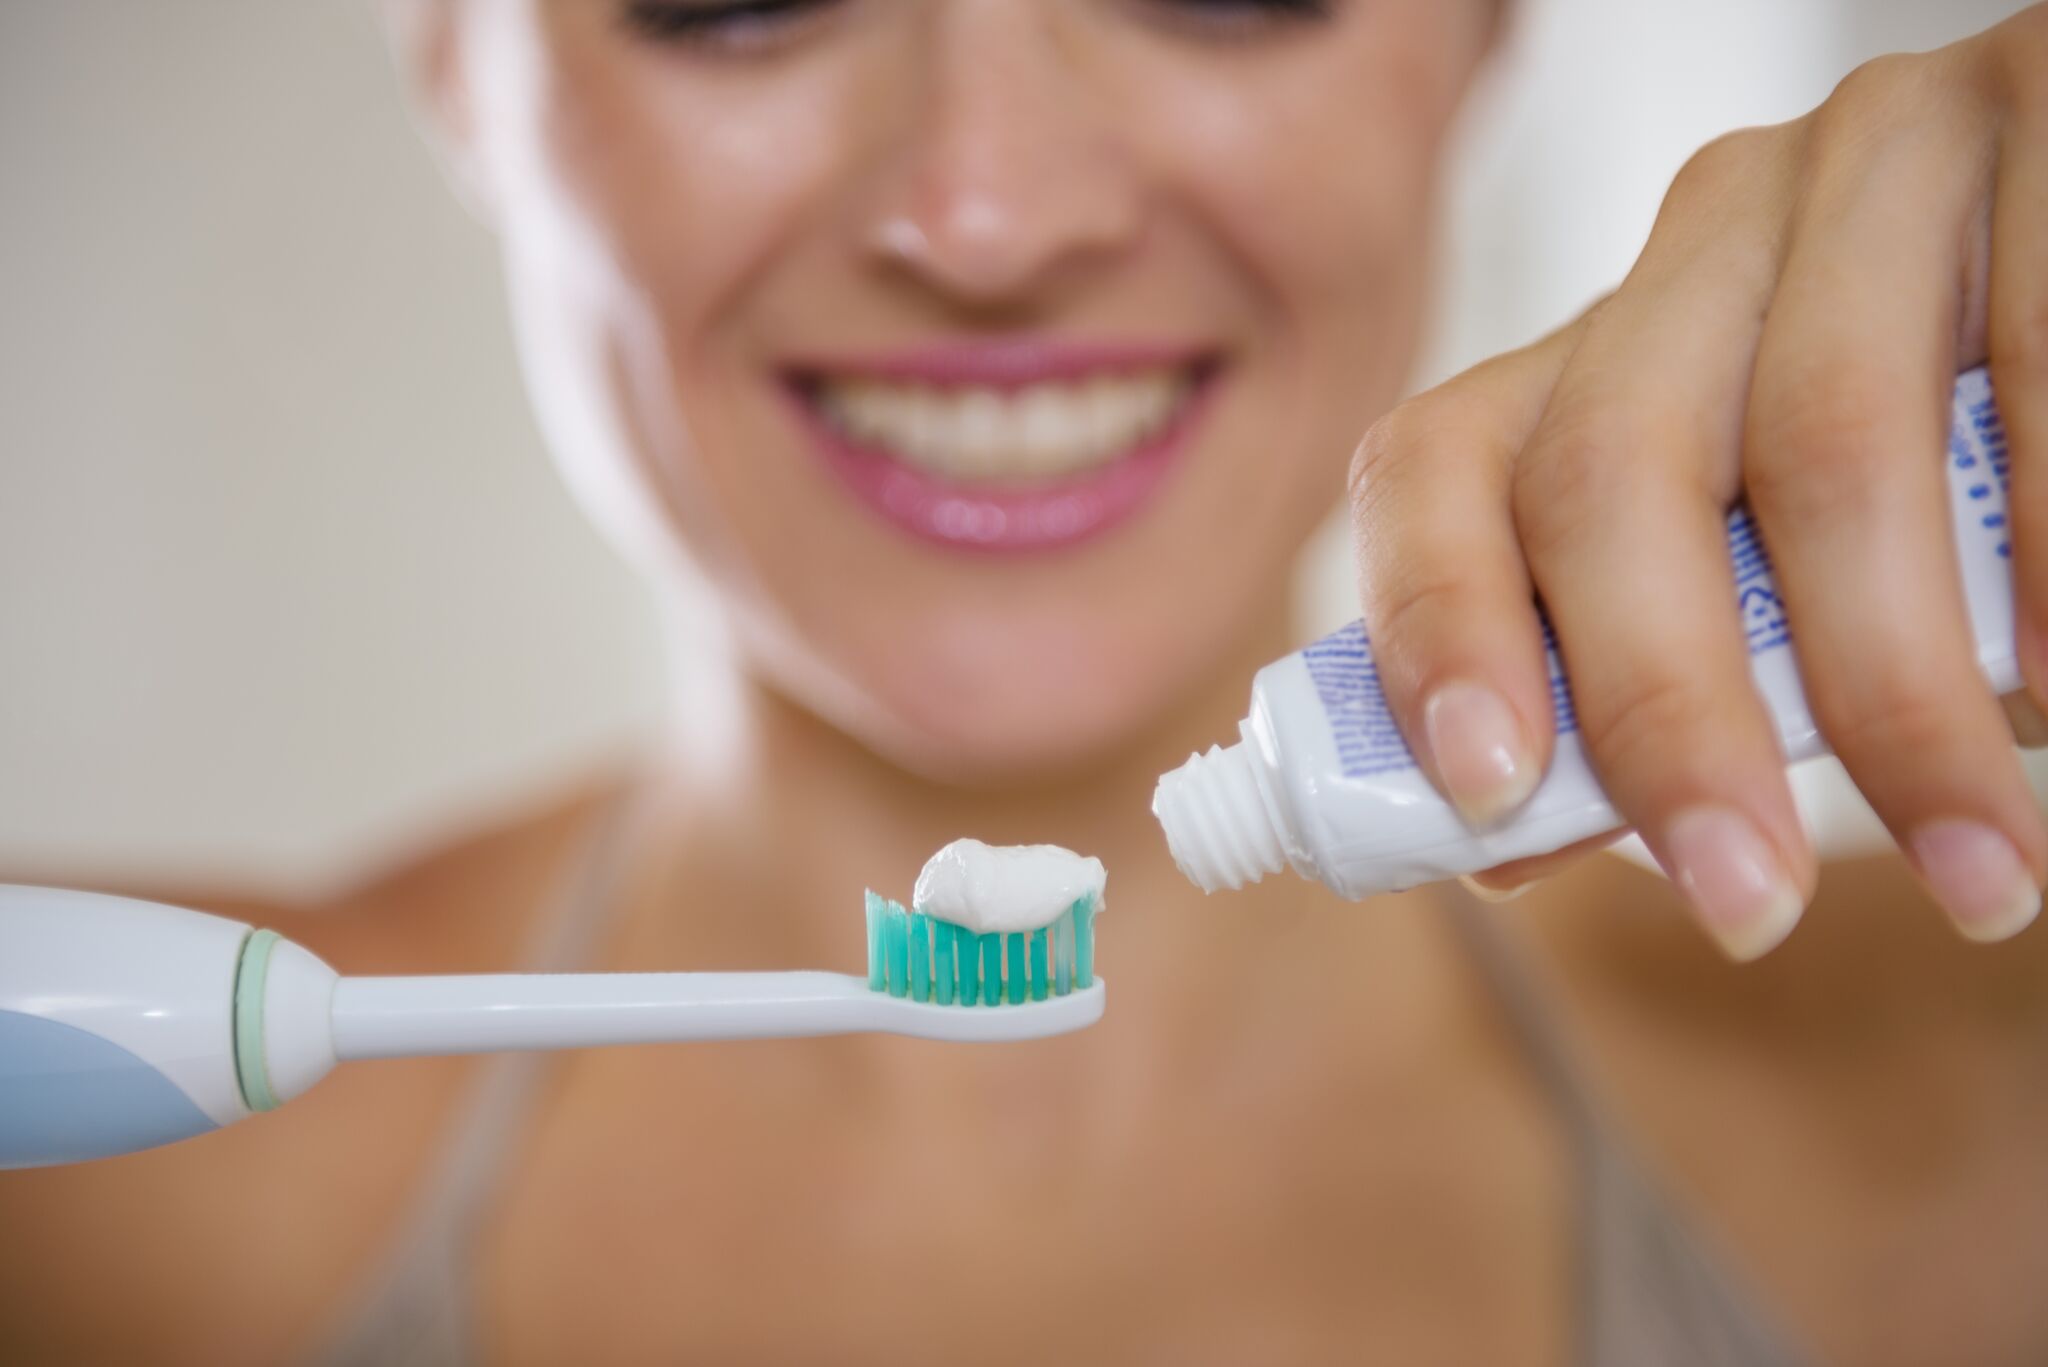 Tongue Scrapers and Cleaners  MouthHealthy - Oral Health Information from  the ADA